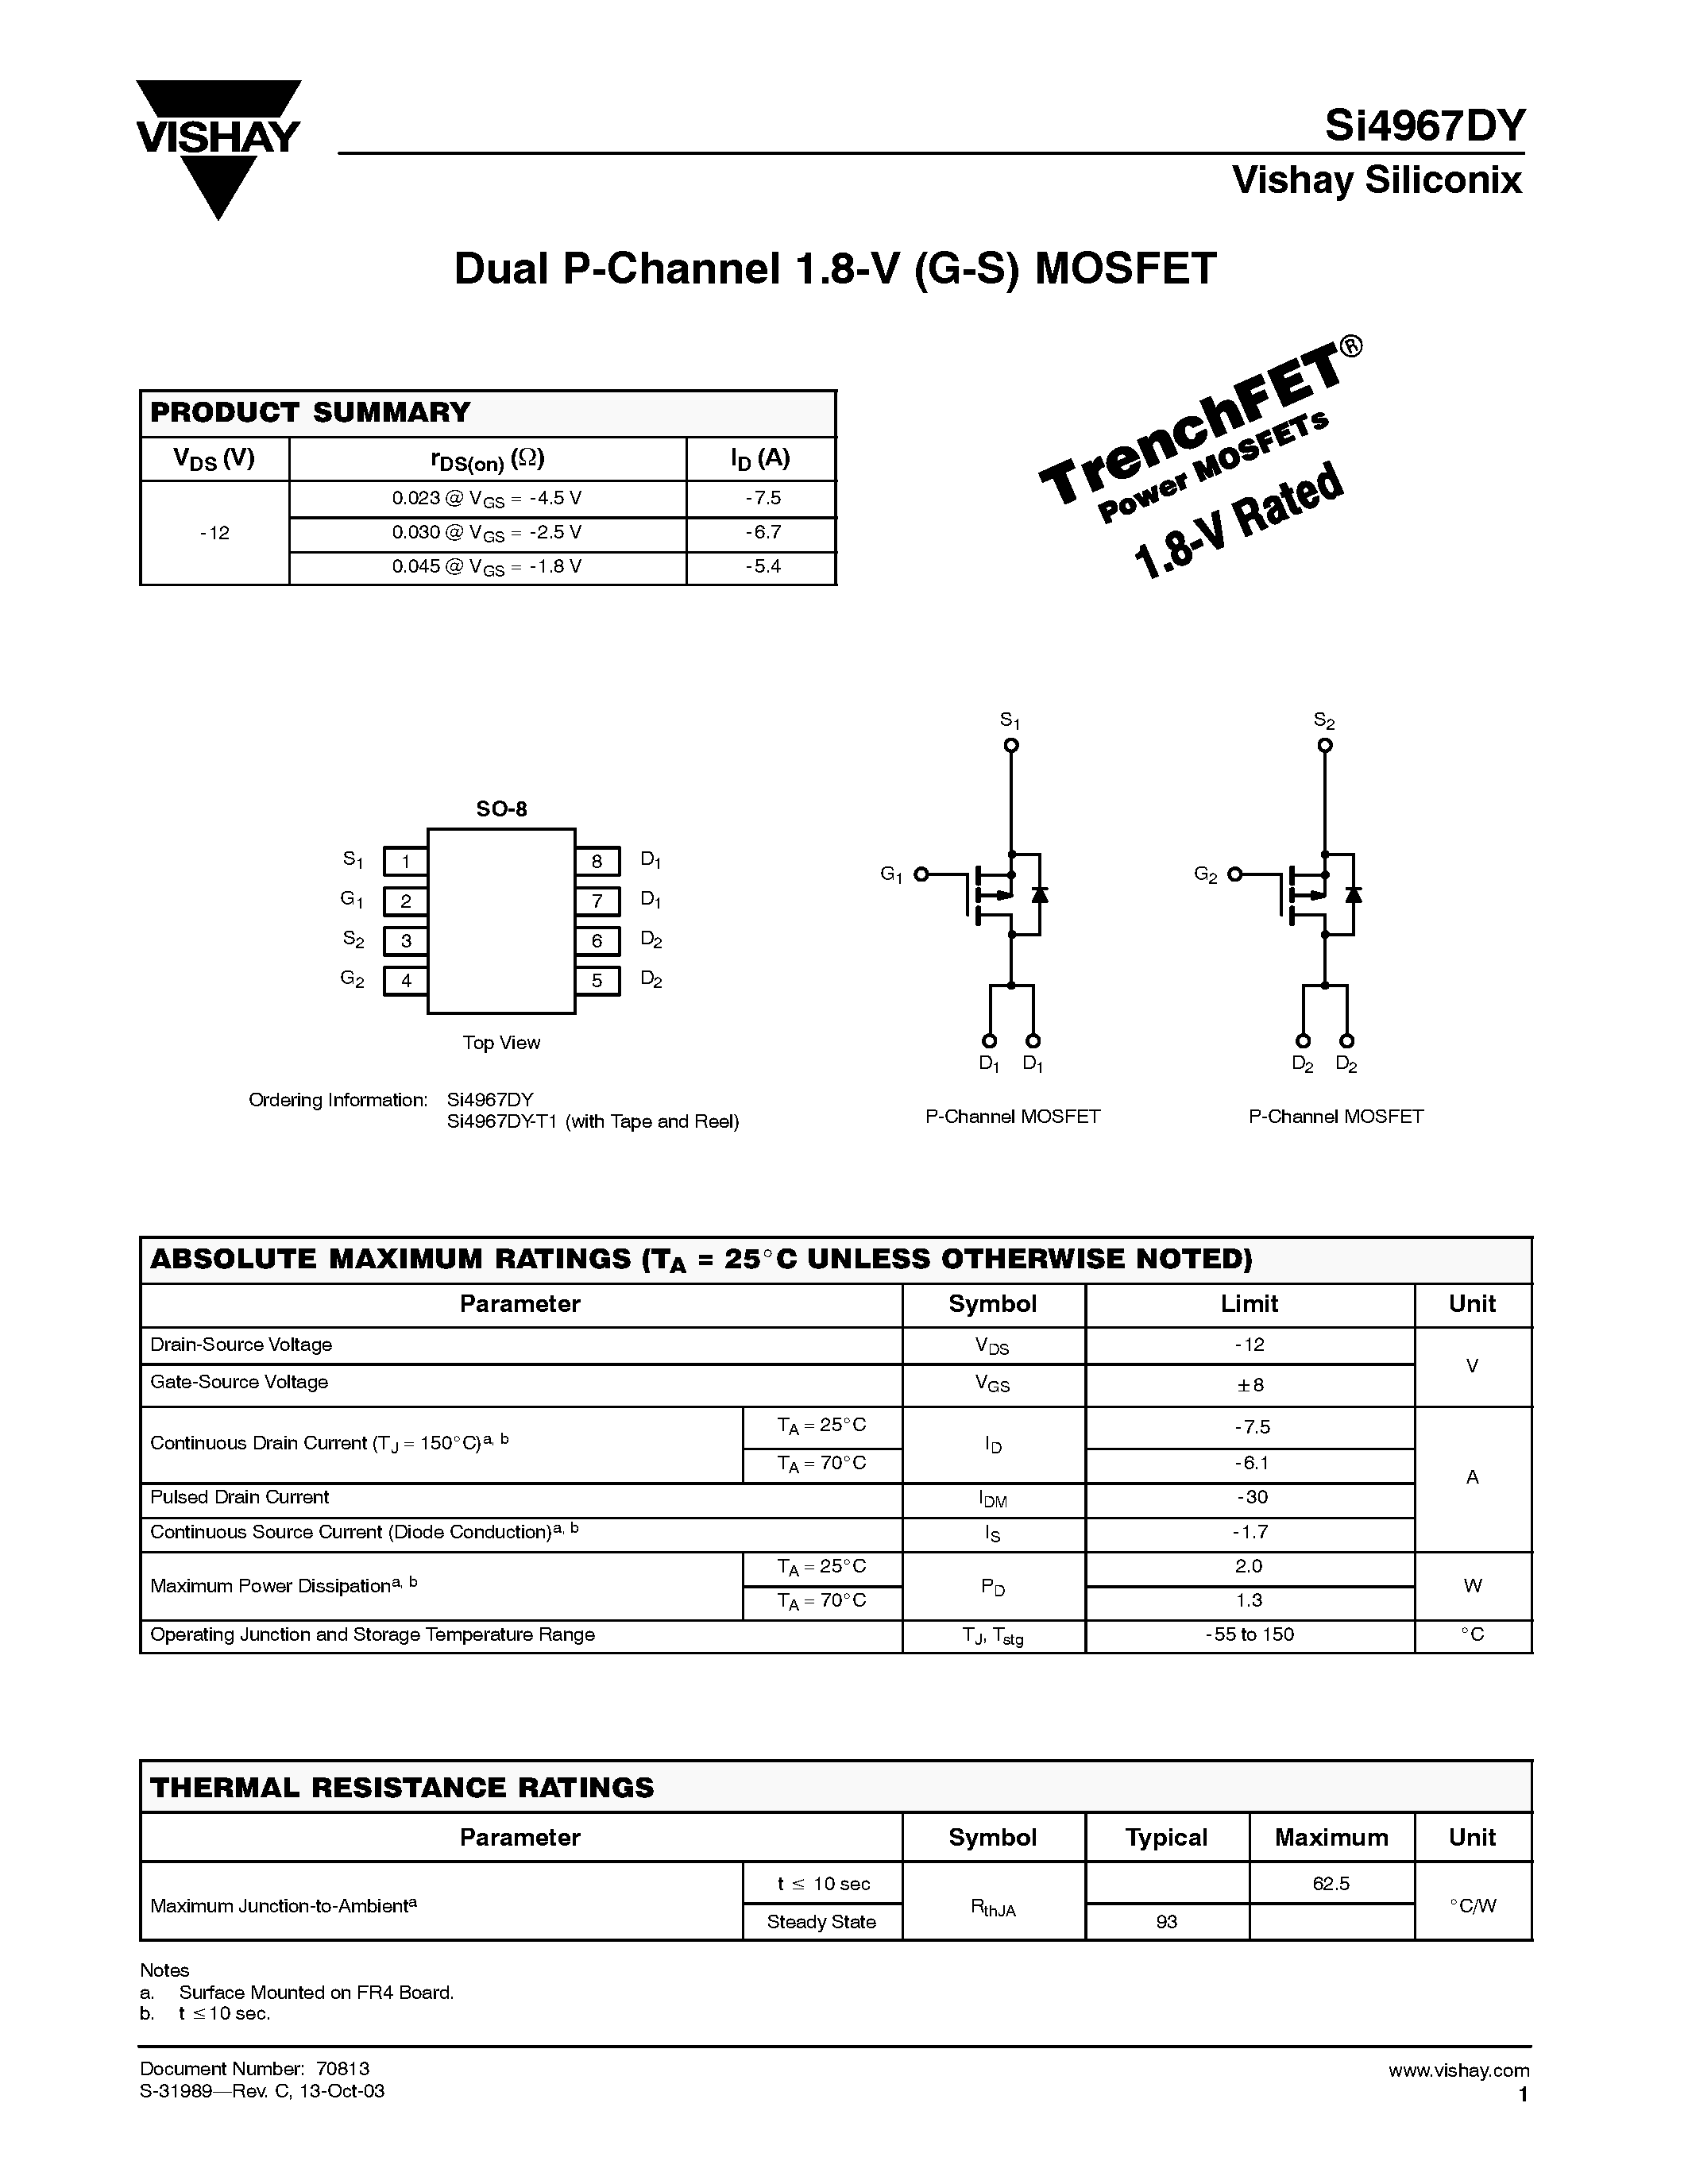 Datasheet SI4967DY - Dual P-Channel 1.8-V (G-S) MOSFET page 1